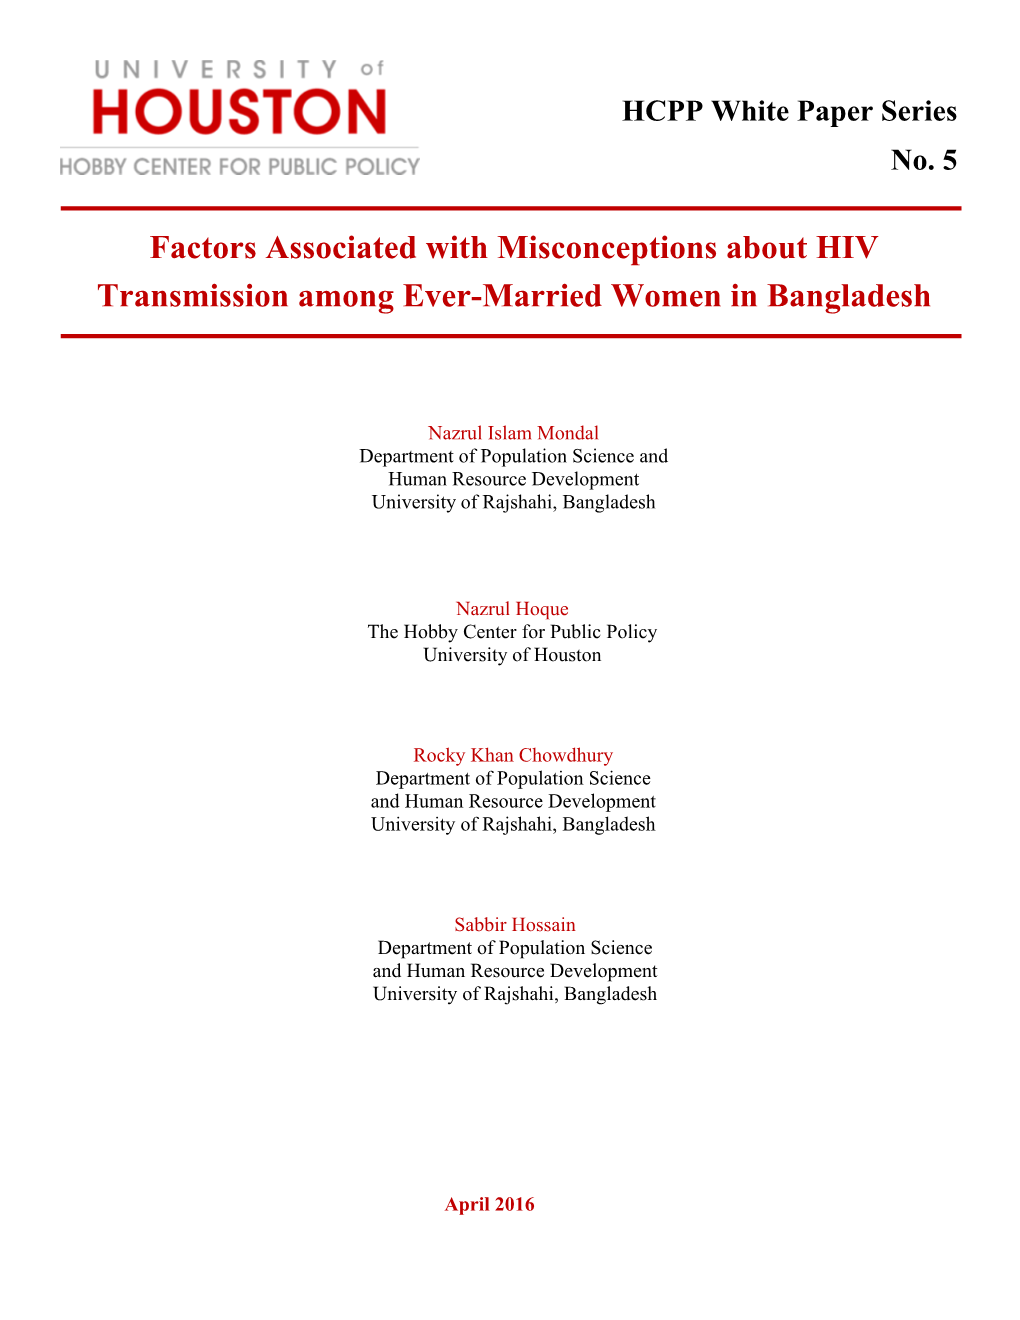 Factors Associated with Misconceptions About HIV Transmission Among Ever-Married Women in Bangladesh